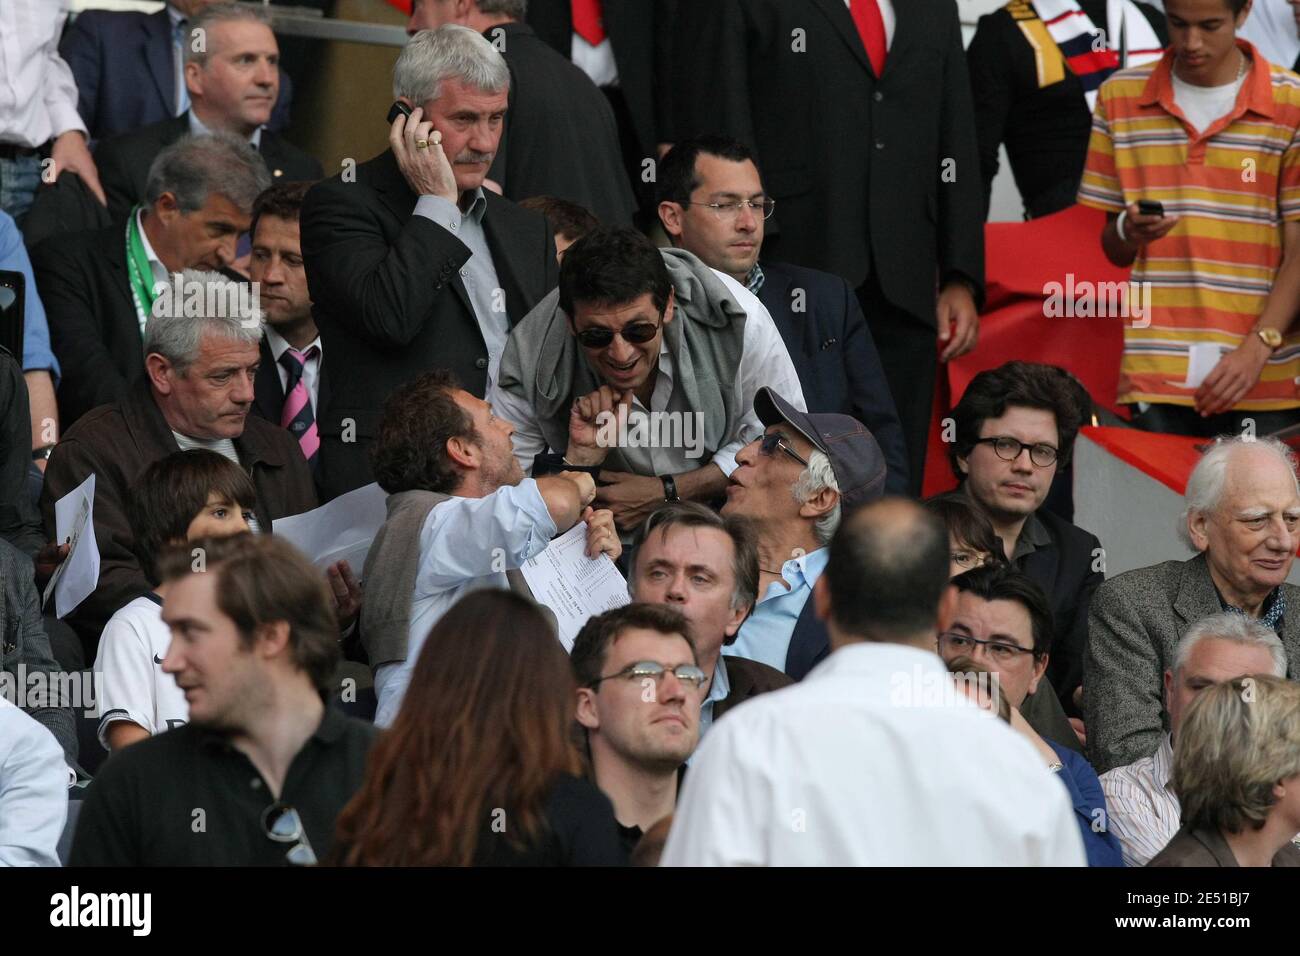 Patrick Bruel and Gerard Darmon attend the French First League Soccer match, Paris Saint-Germain vs aS Saint-Etienne at the Parc des Princes stadium in Paris, France on May 10, 2008. The match ended in a 1-1 draw. Photo by Mehdi Taamallah/Cameleon/ABACAPRESS.COM Stock Photo